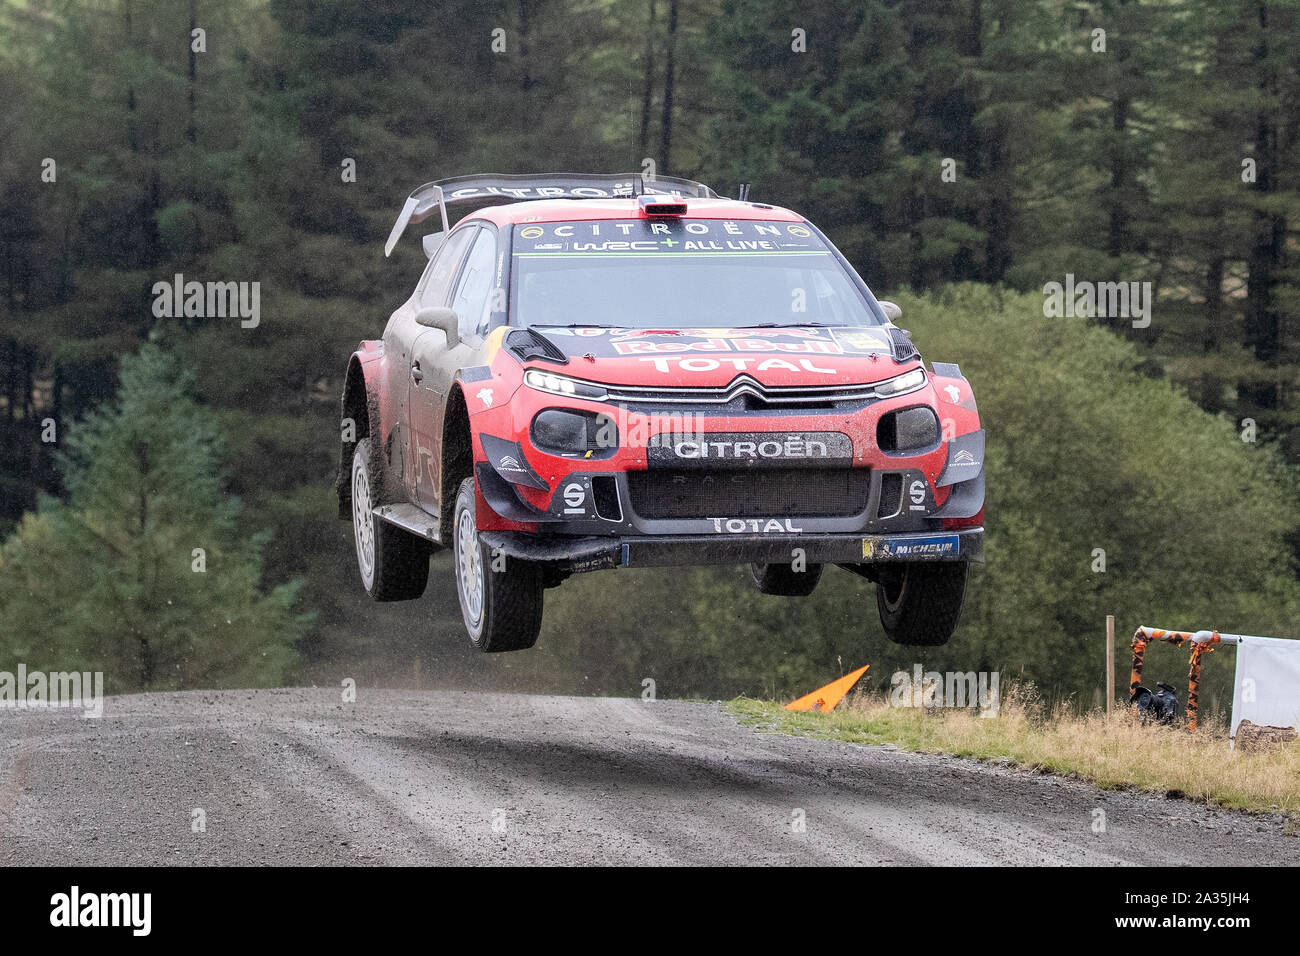 Llanidloes, UK. 5th Oct, 2019. Sebastien Ogier and co-driver Julien Ingrassia compete in their Citroen Total WRT Citroen C3 WRC during Stage fifteen of the Wales Rally GB, Credit: Jason Richardson/Alamy Live News Stock Photo